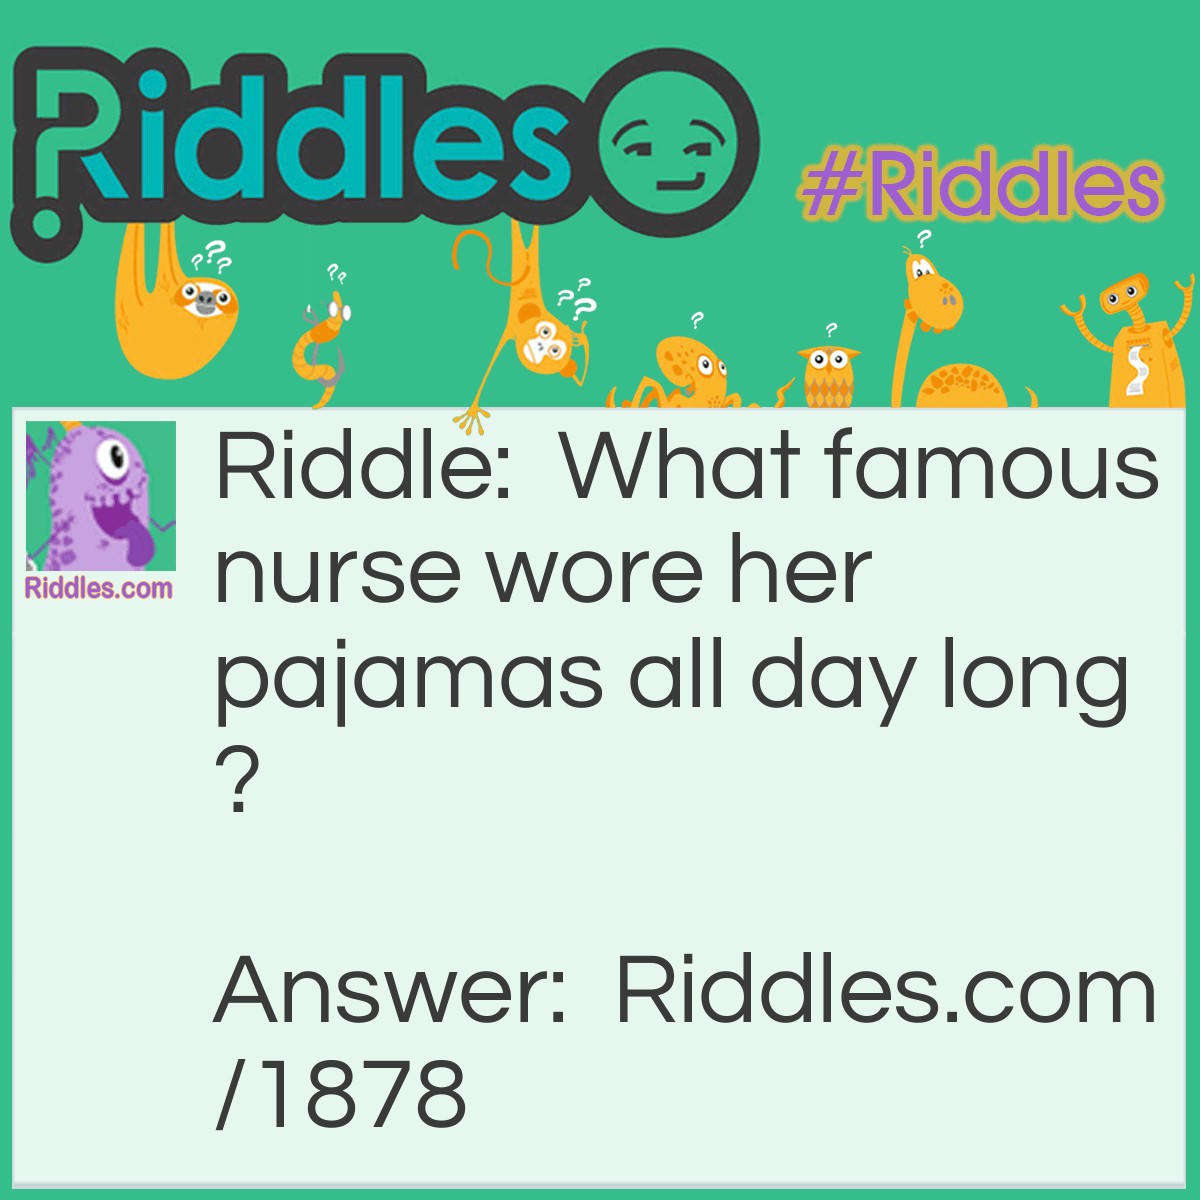 Riddle: What famous nurse wore her pajamas all day long? Answer: Florence Nightingown.